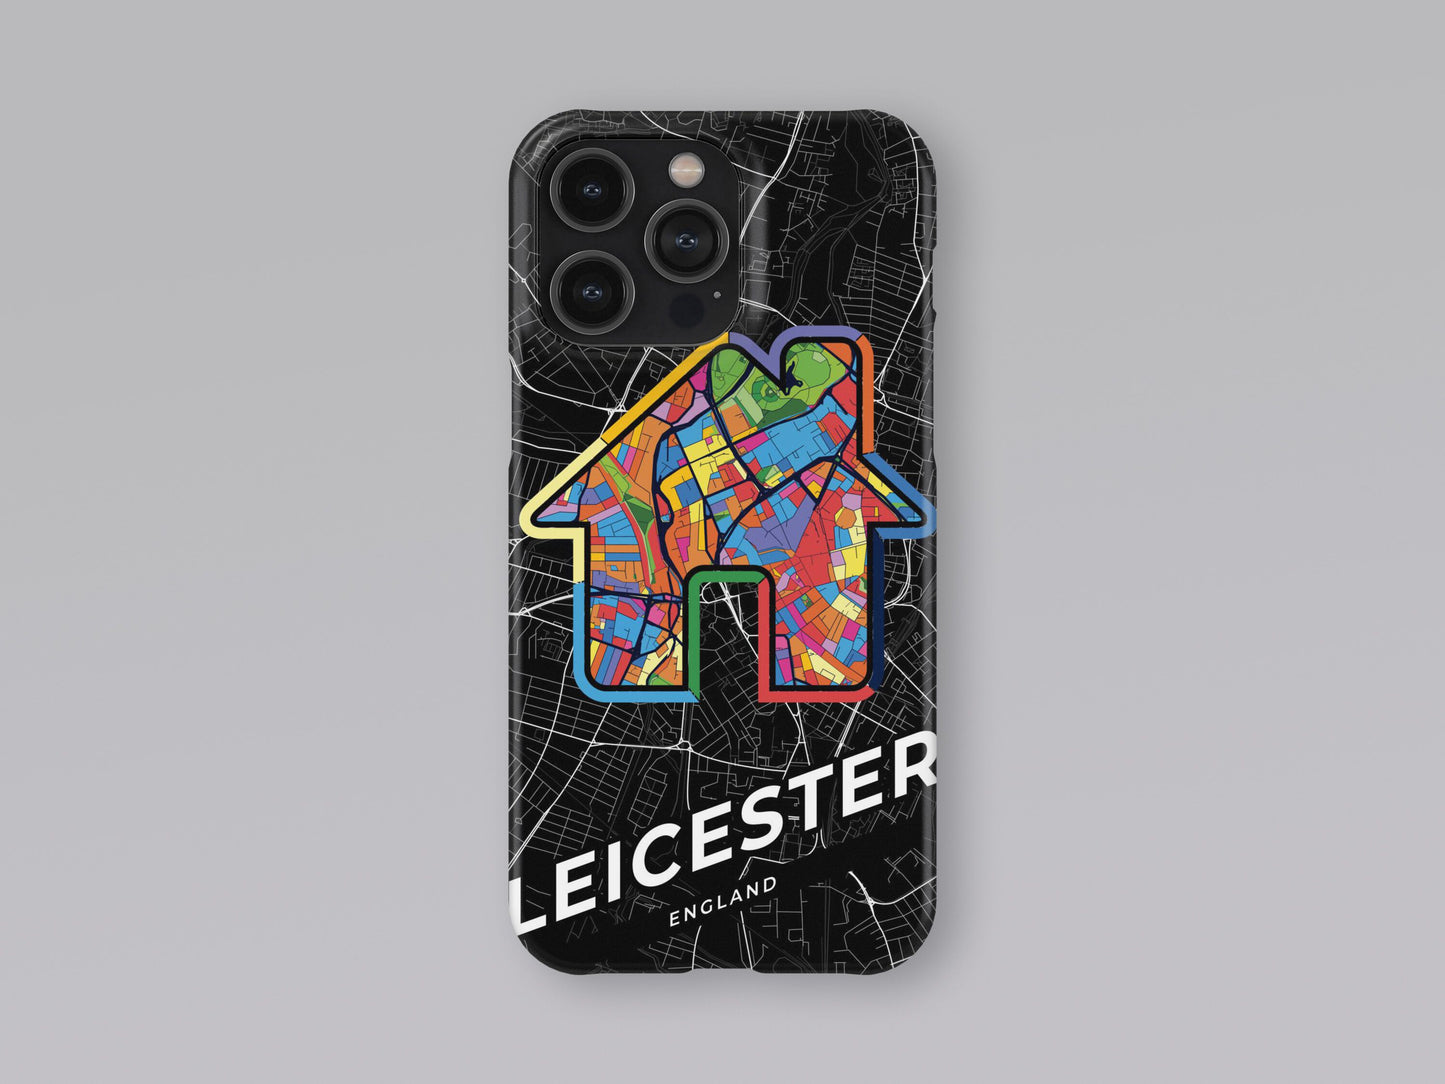 Leicester England slim phone case with colorful icon. Birthday, wedding or housewarming gift. Couple match cases. 3